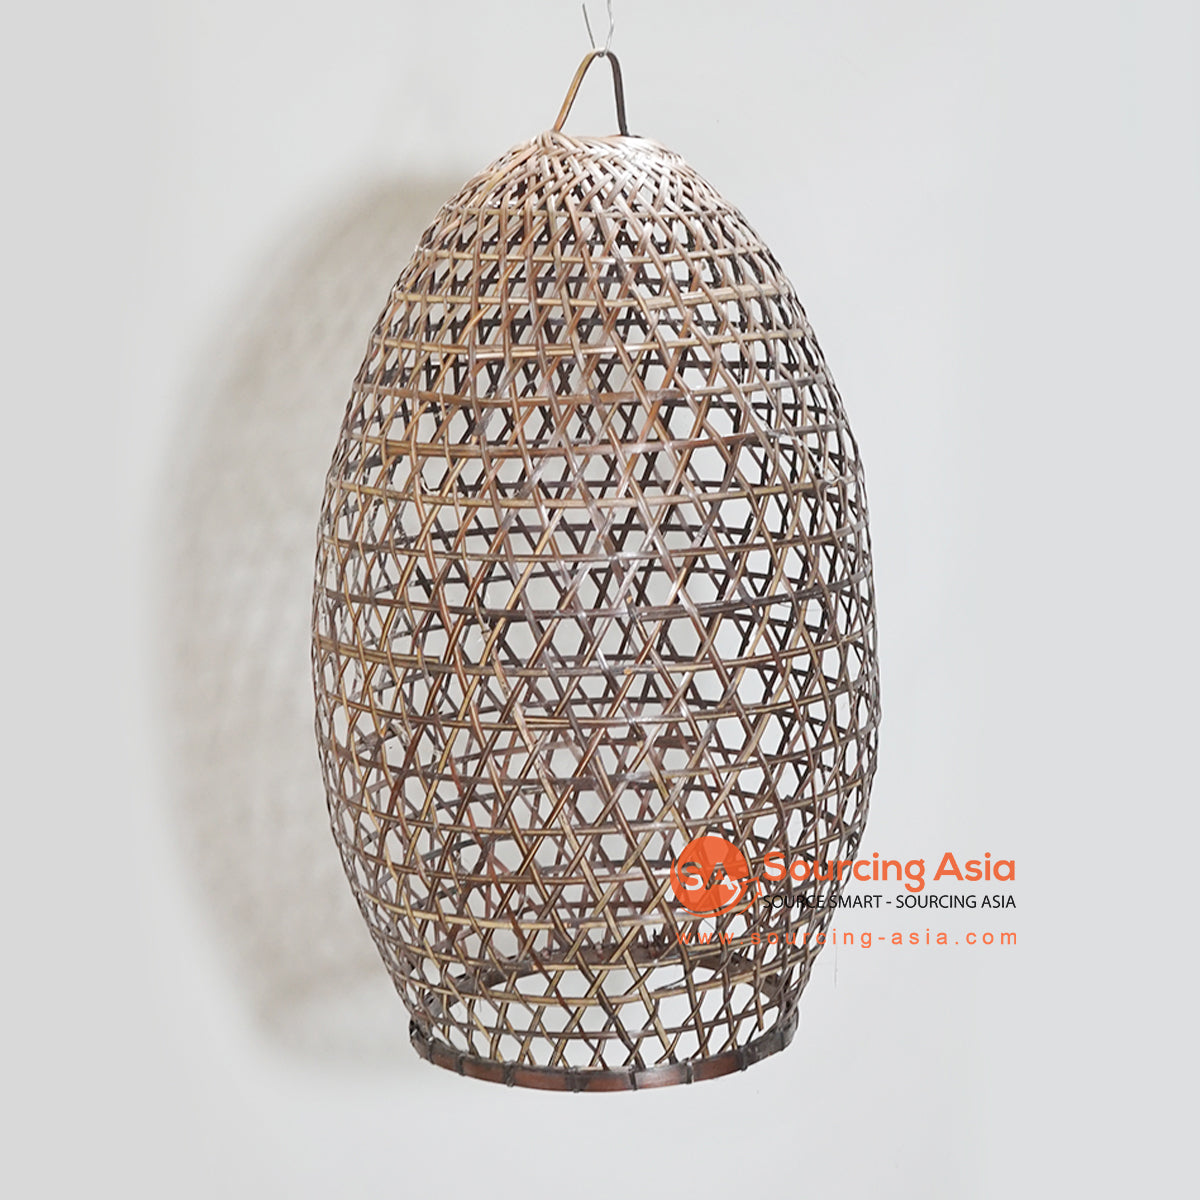 HBSC228 NATURAL BAMBOO WOOD CHICKEN CAGE PENDANT LAMP